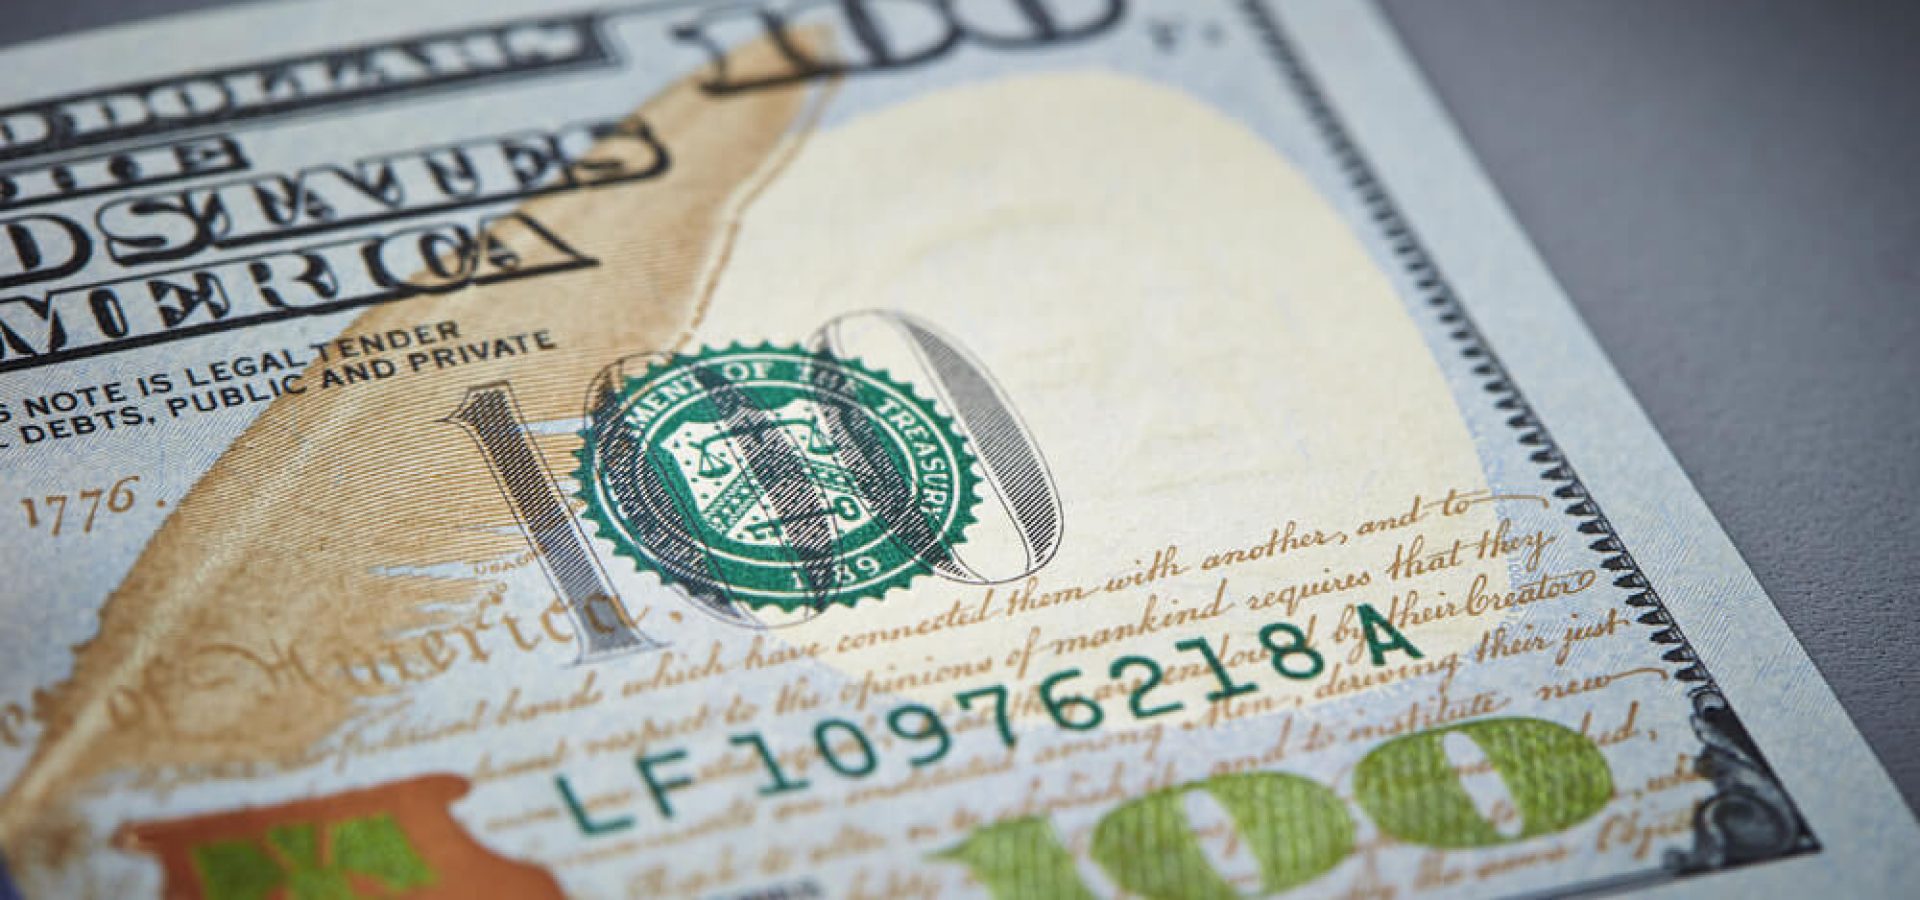 Wibest Broker-Currency Pairs: close up shot of a US dollar bill